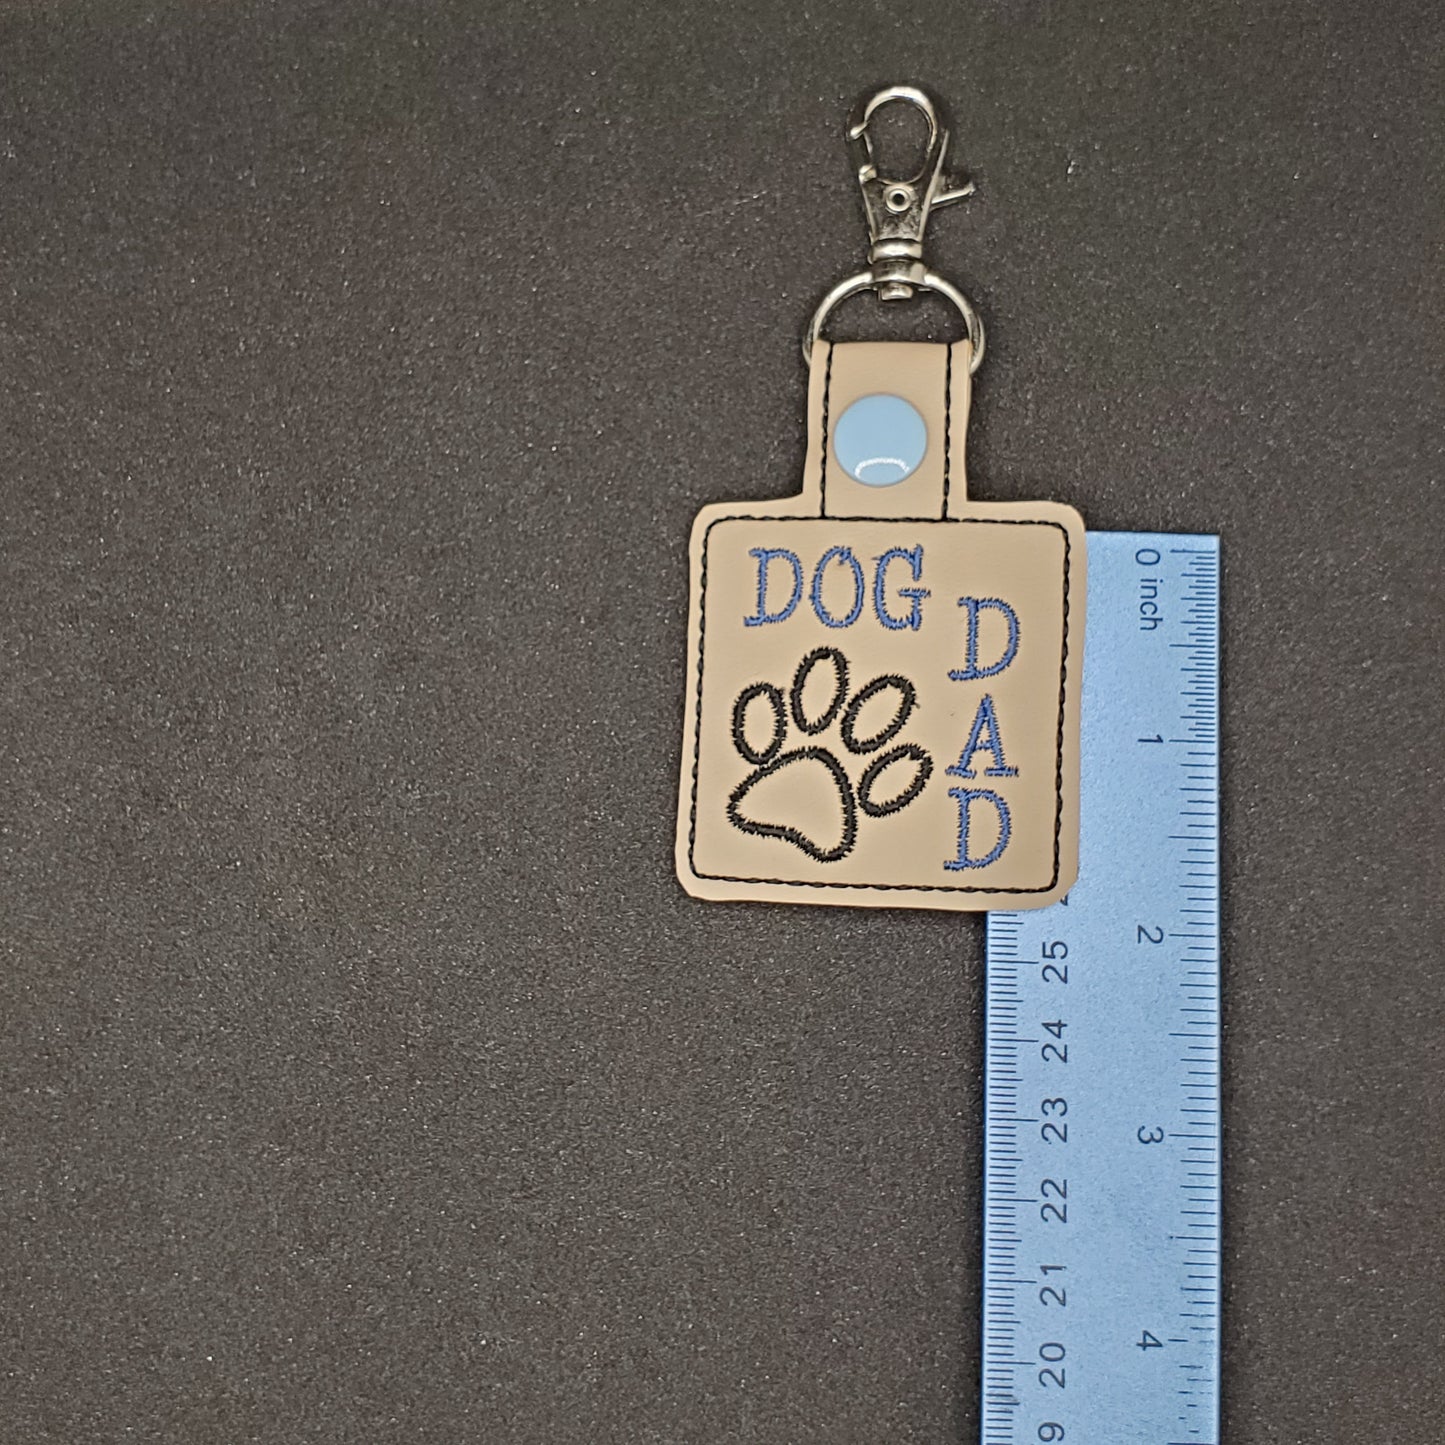 Dog Dad - Words stitched in Blue, Key Chain / Backpack Charm